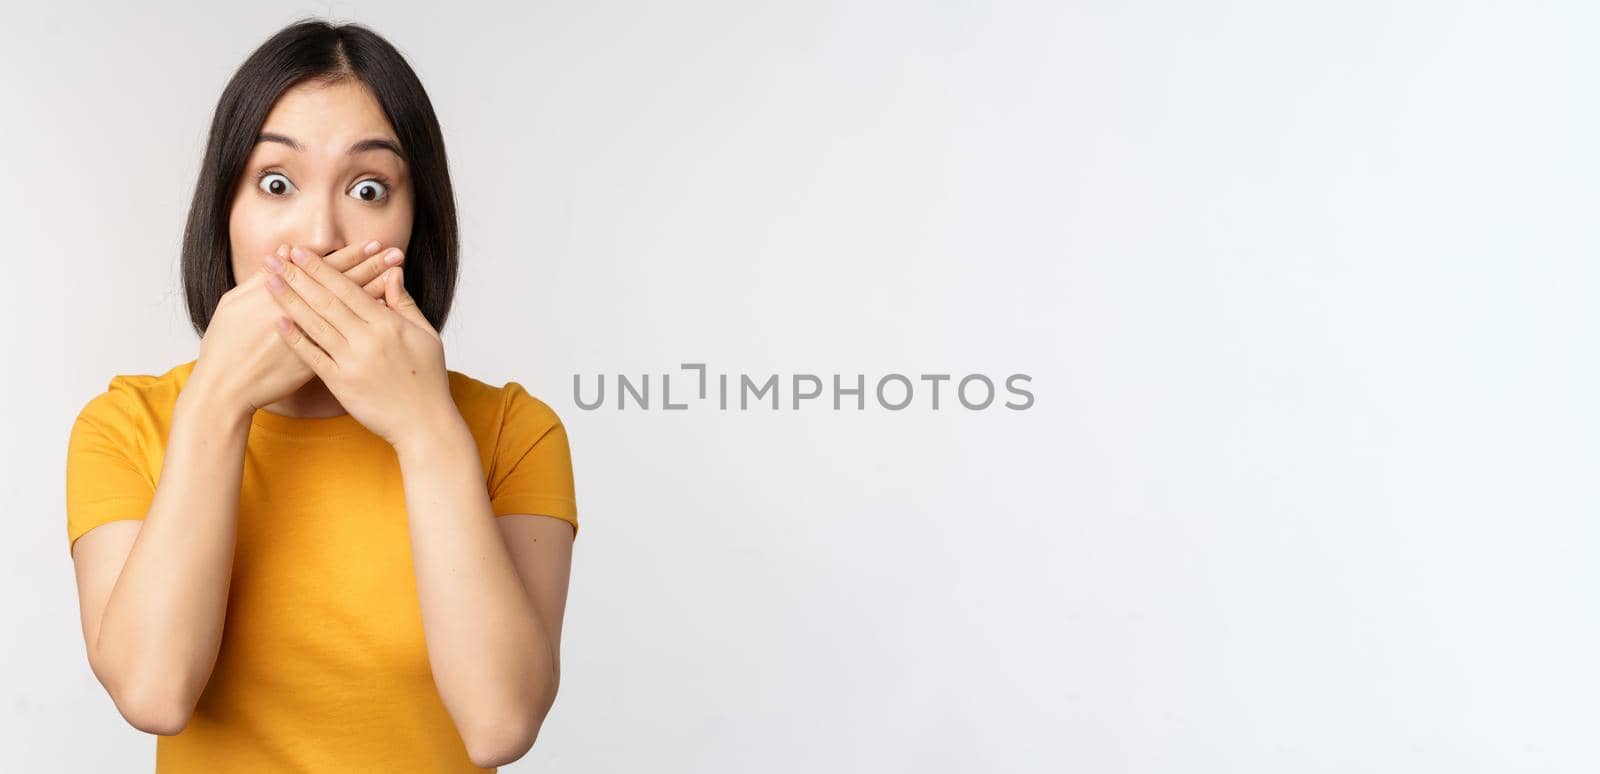 Shocked asian woman cover mouth with hands, looking startled with speechless face expression, standing in yellow tshirt against white background.